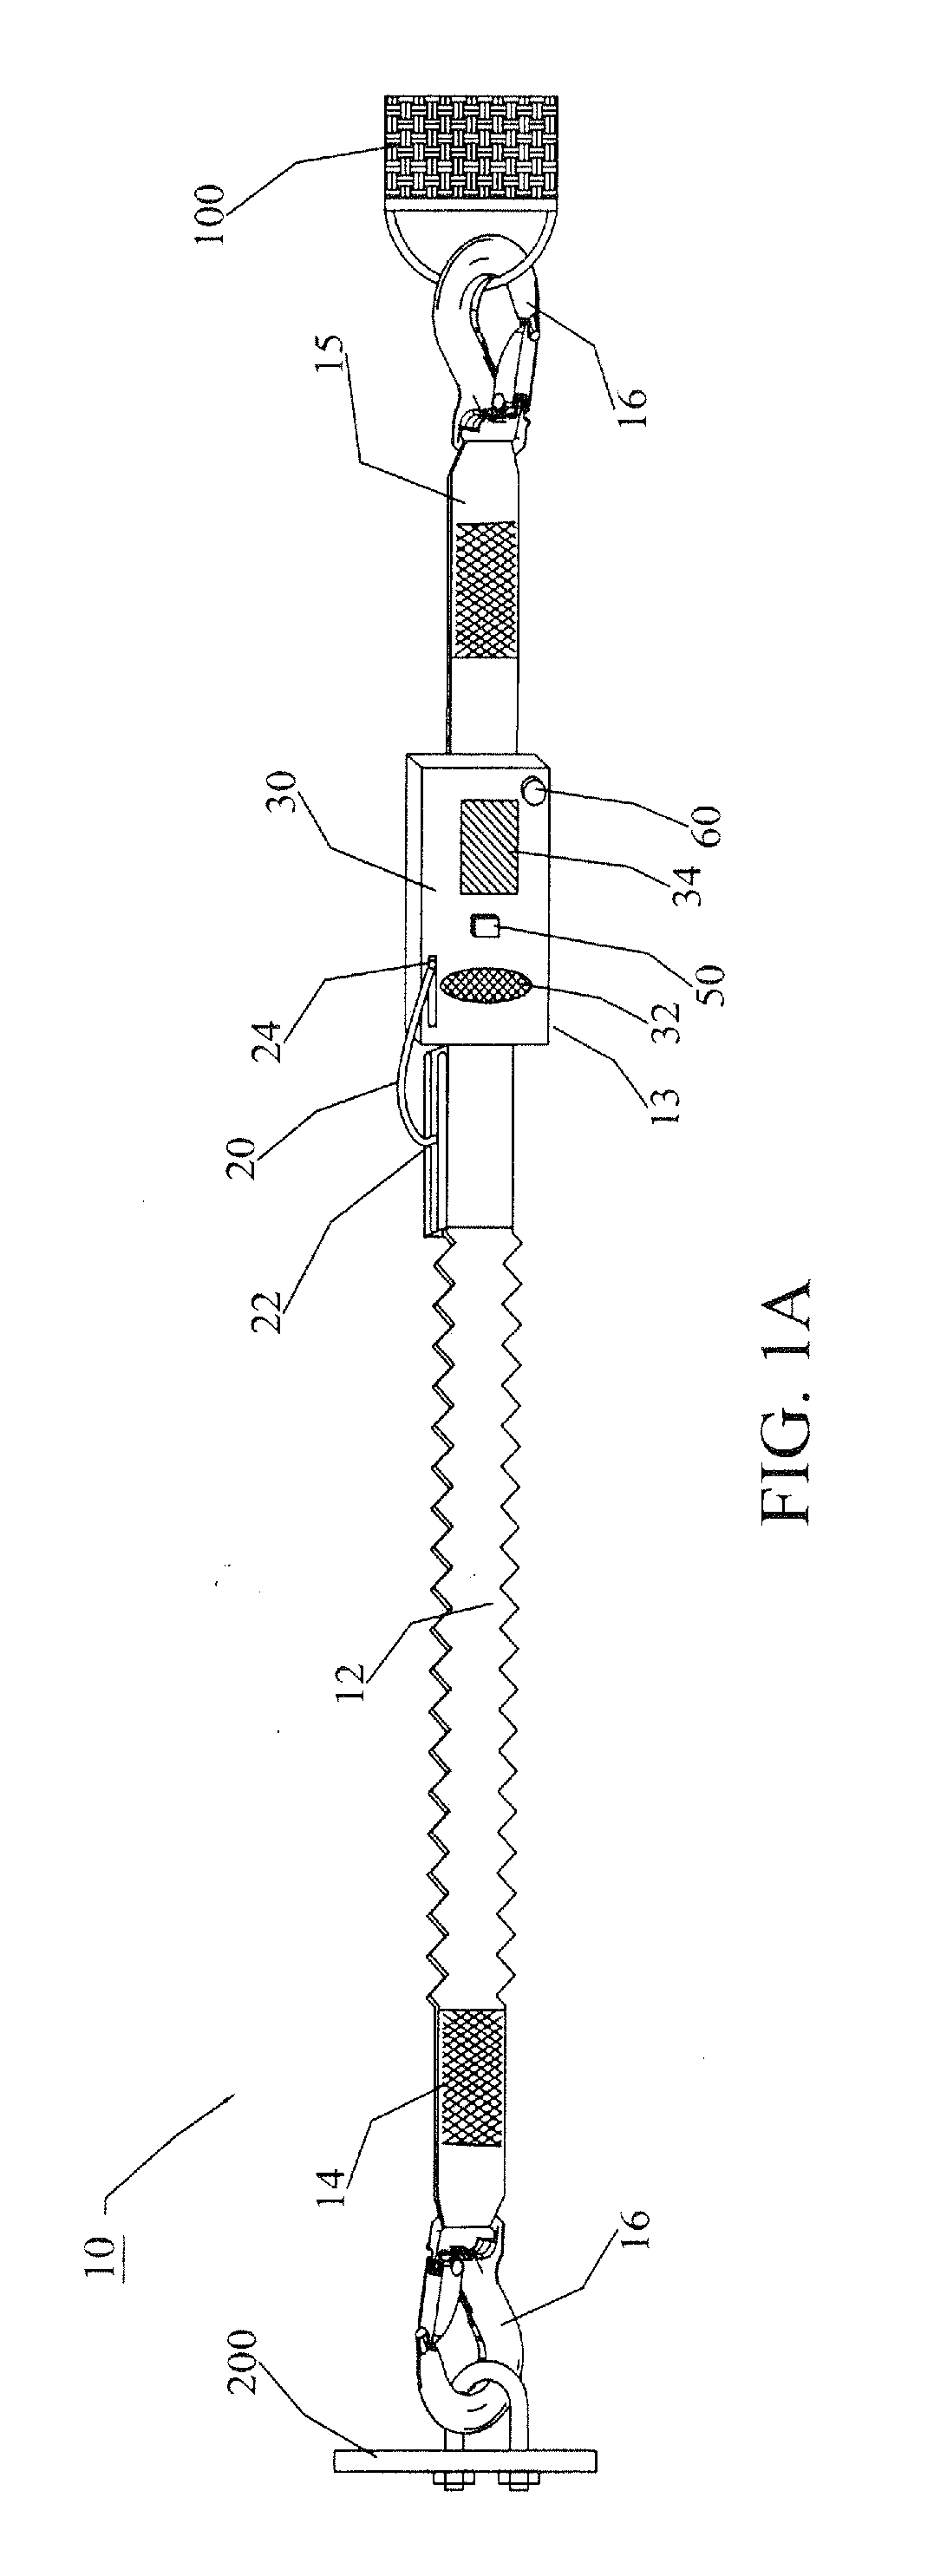 Method and apparatus for activating a communication device operably connected to a safety lanyard